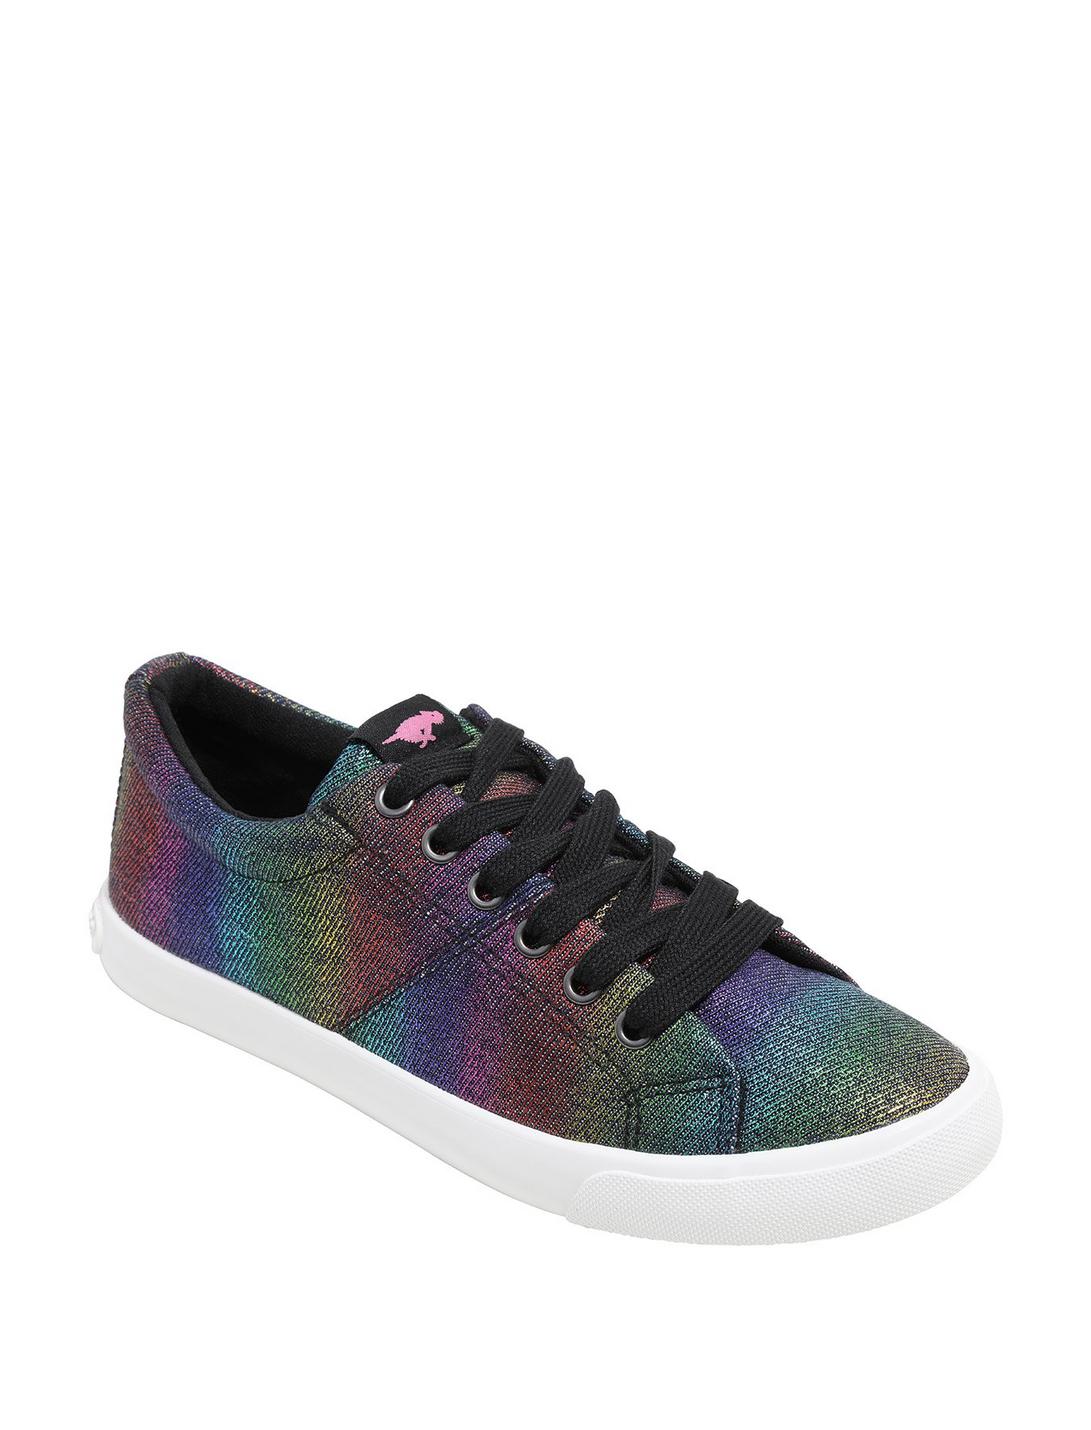 Rainbow Lace-Up Sneakers, MULTI, hi-res